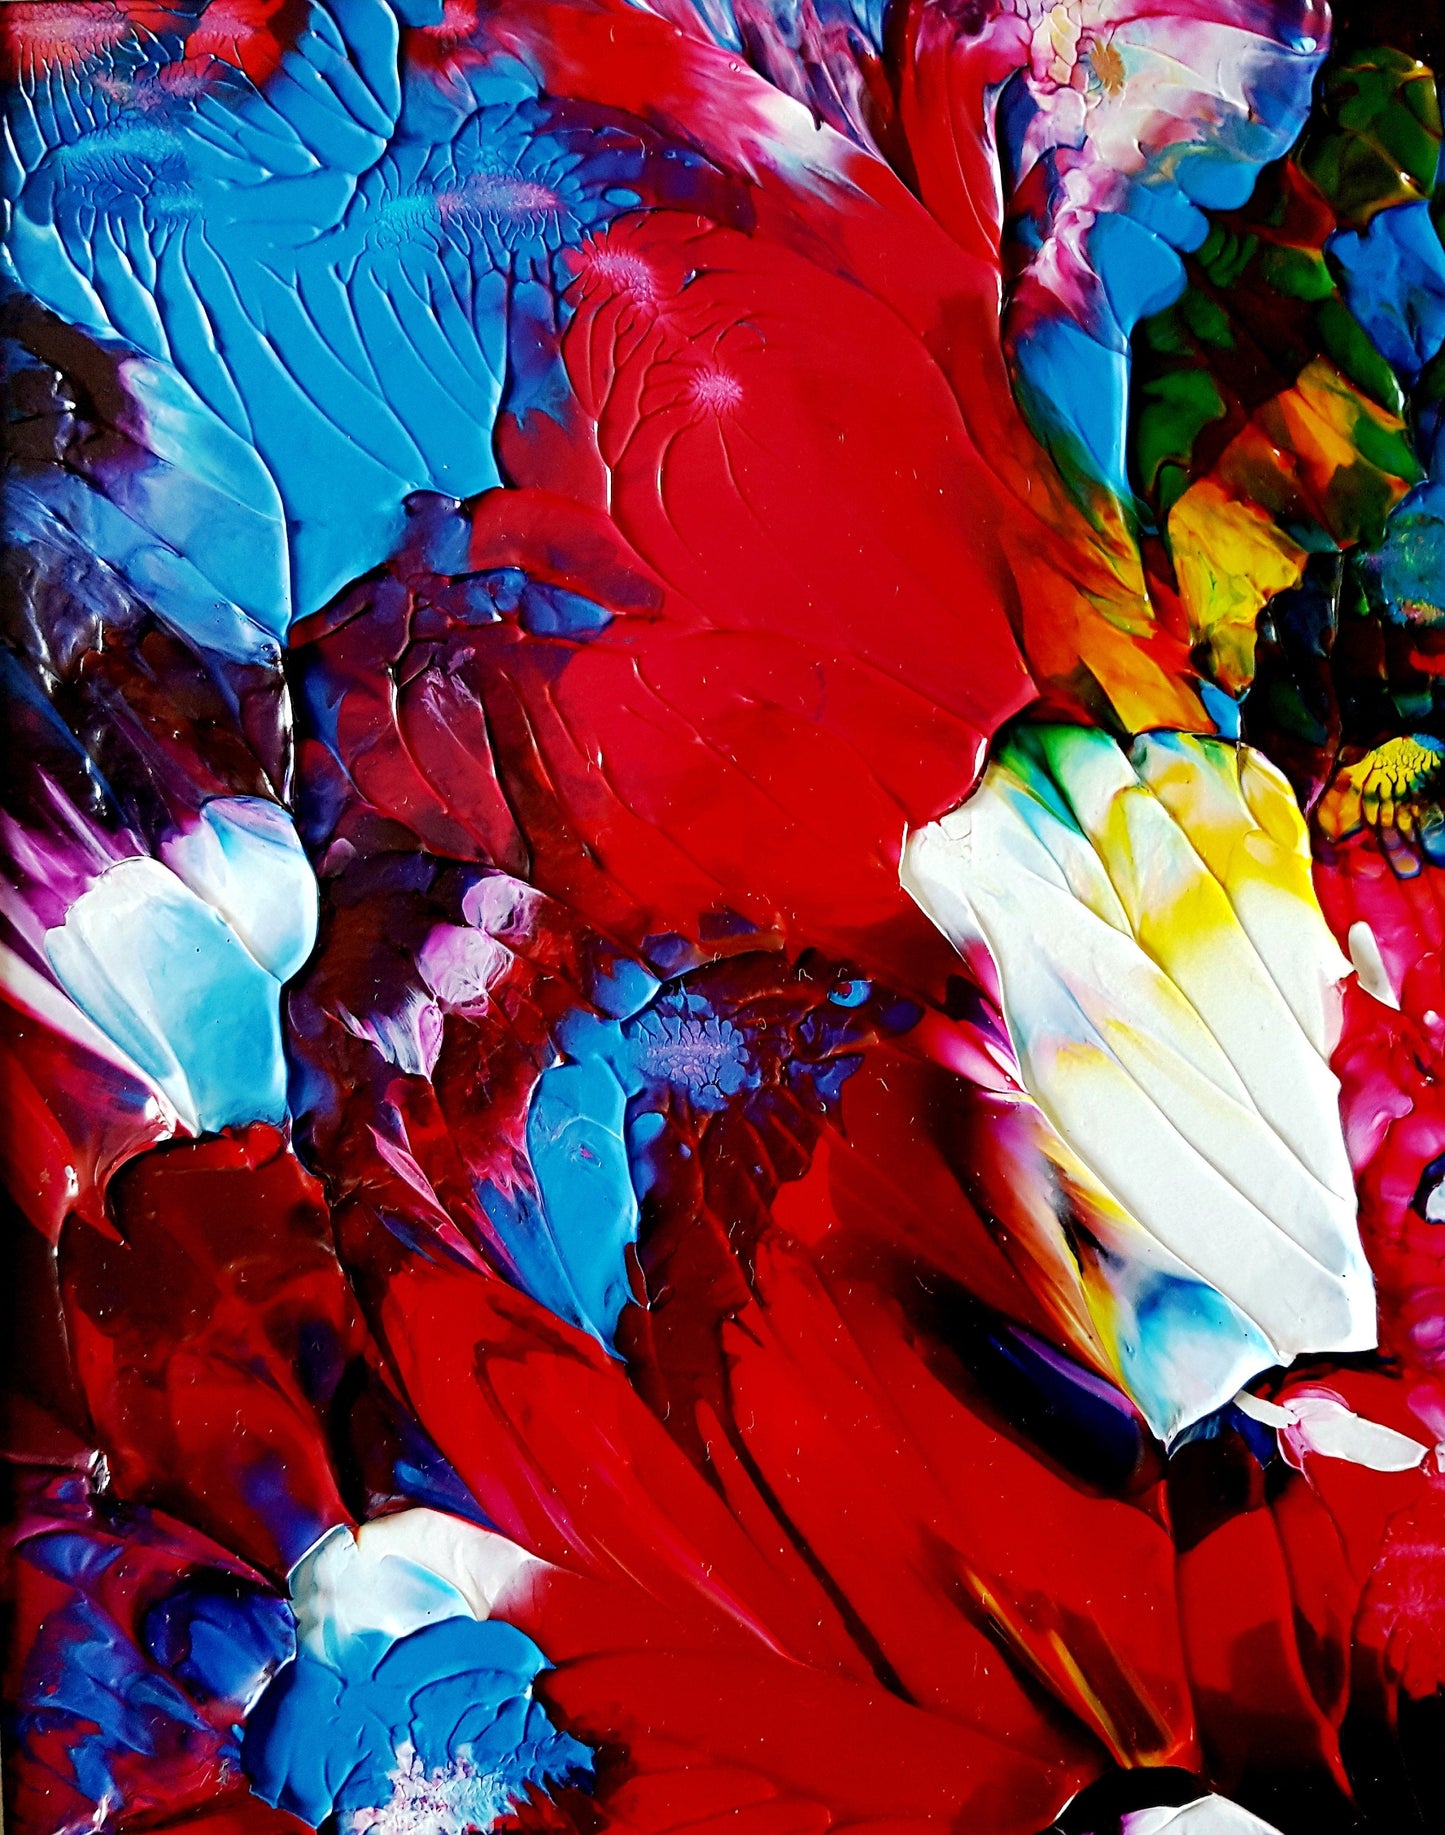 Floral Gift Abstract Original Painting